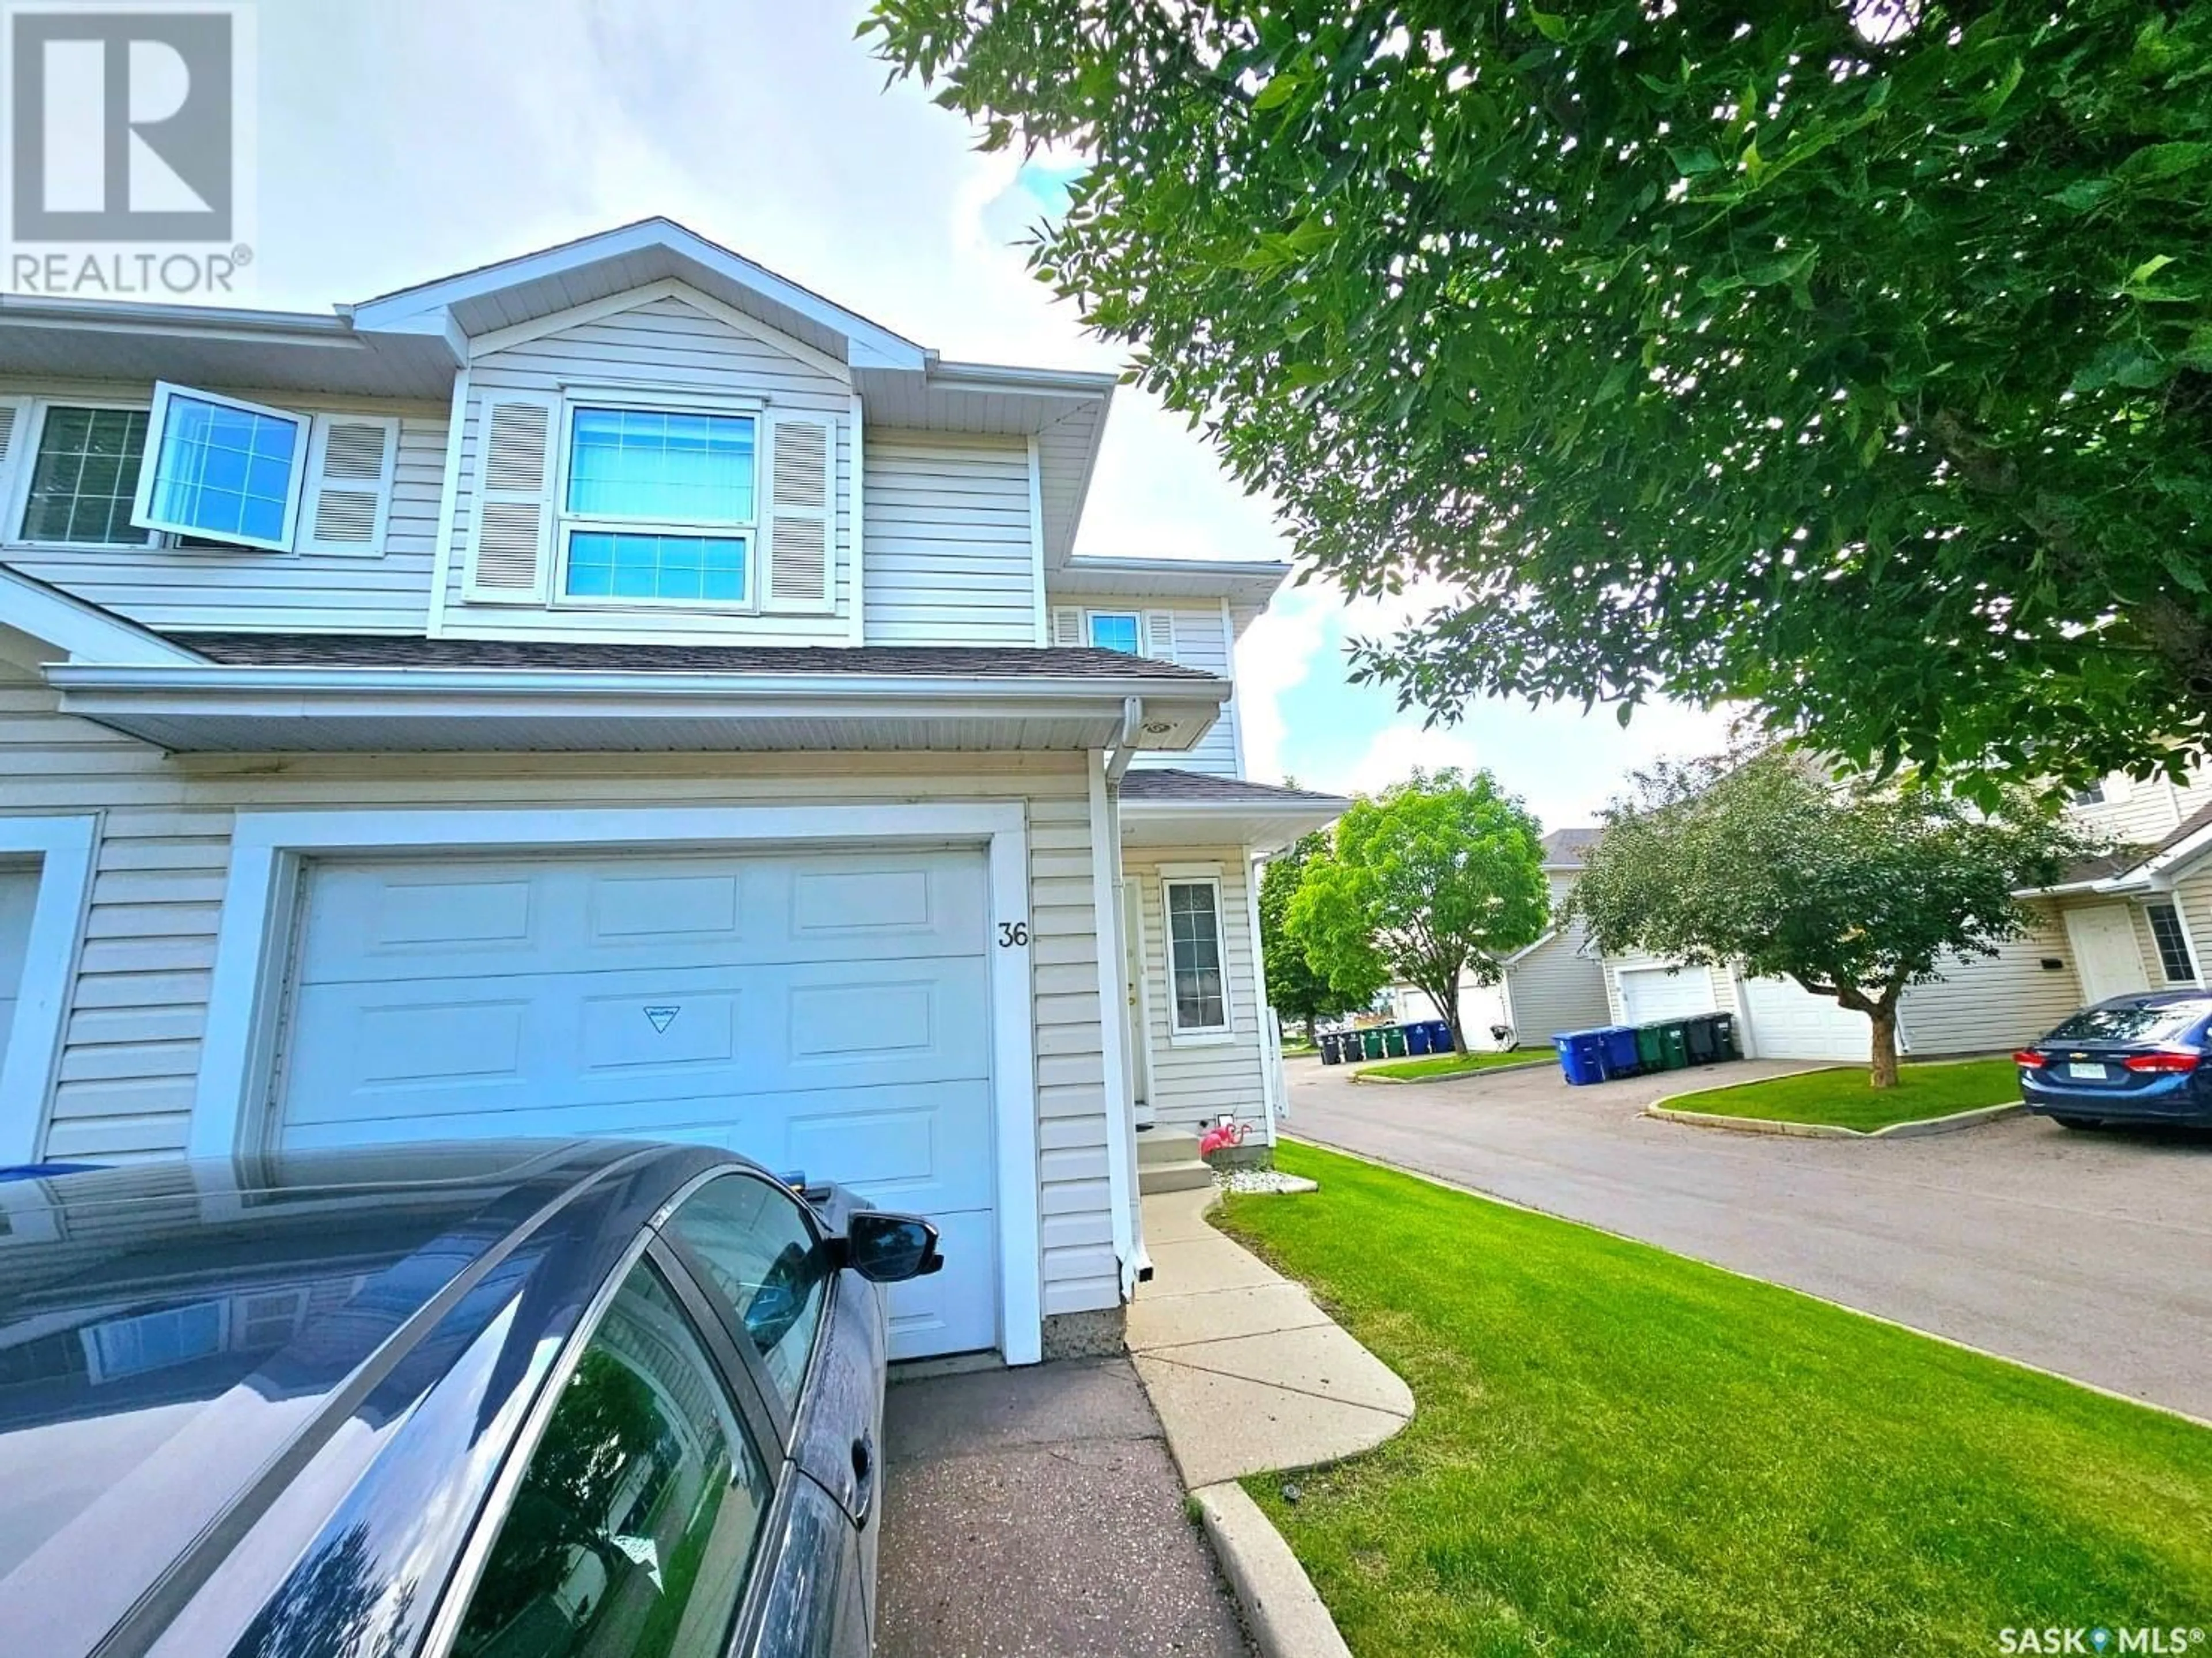 A pic from exterior of the house or condo for 36 110 Keevil CRESCENT, Saskatoon Saskatchewan S7N4B6